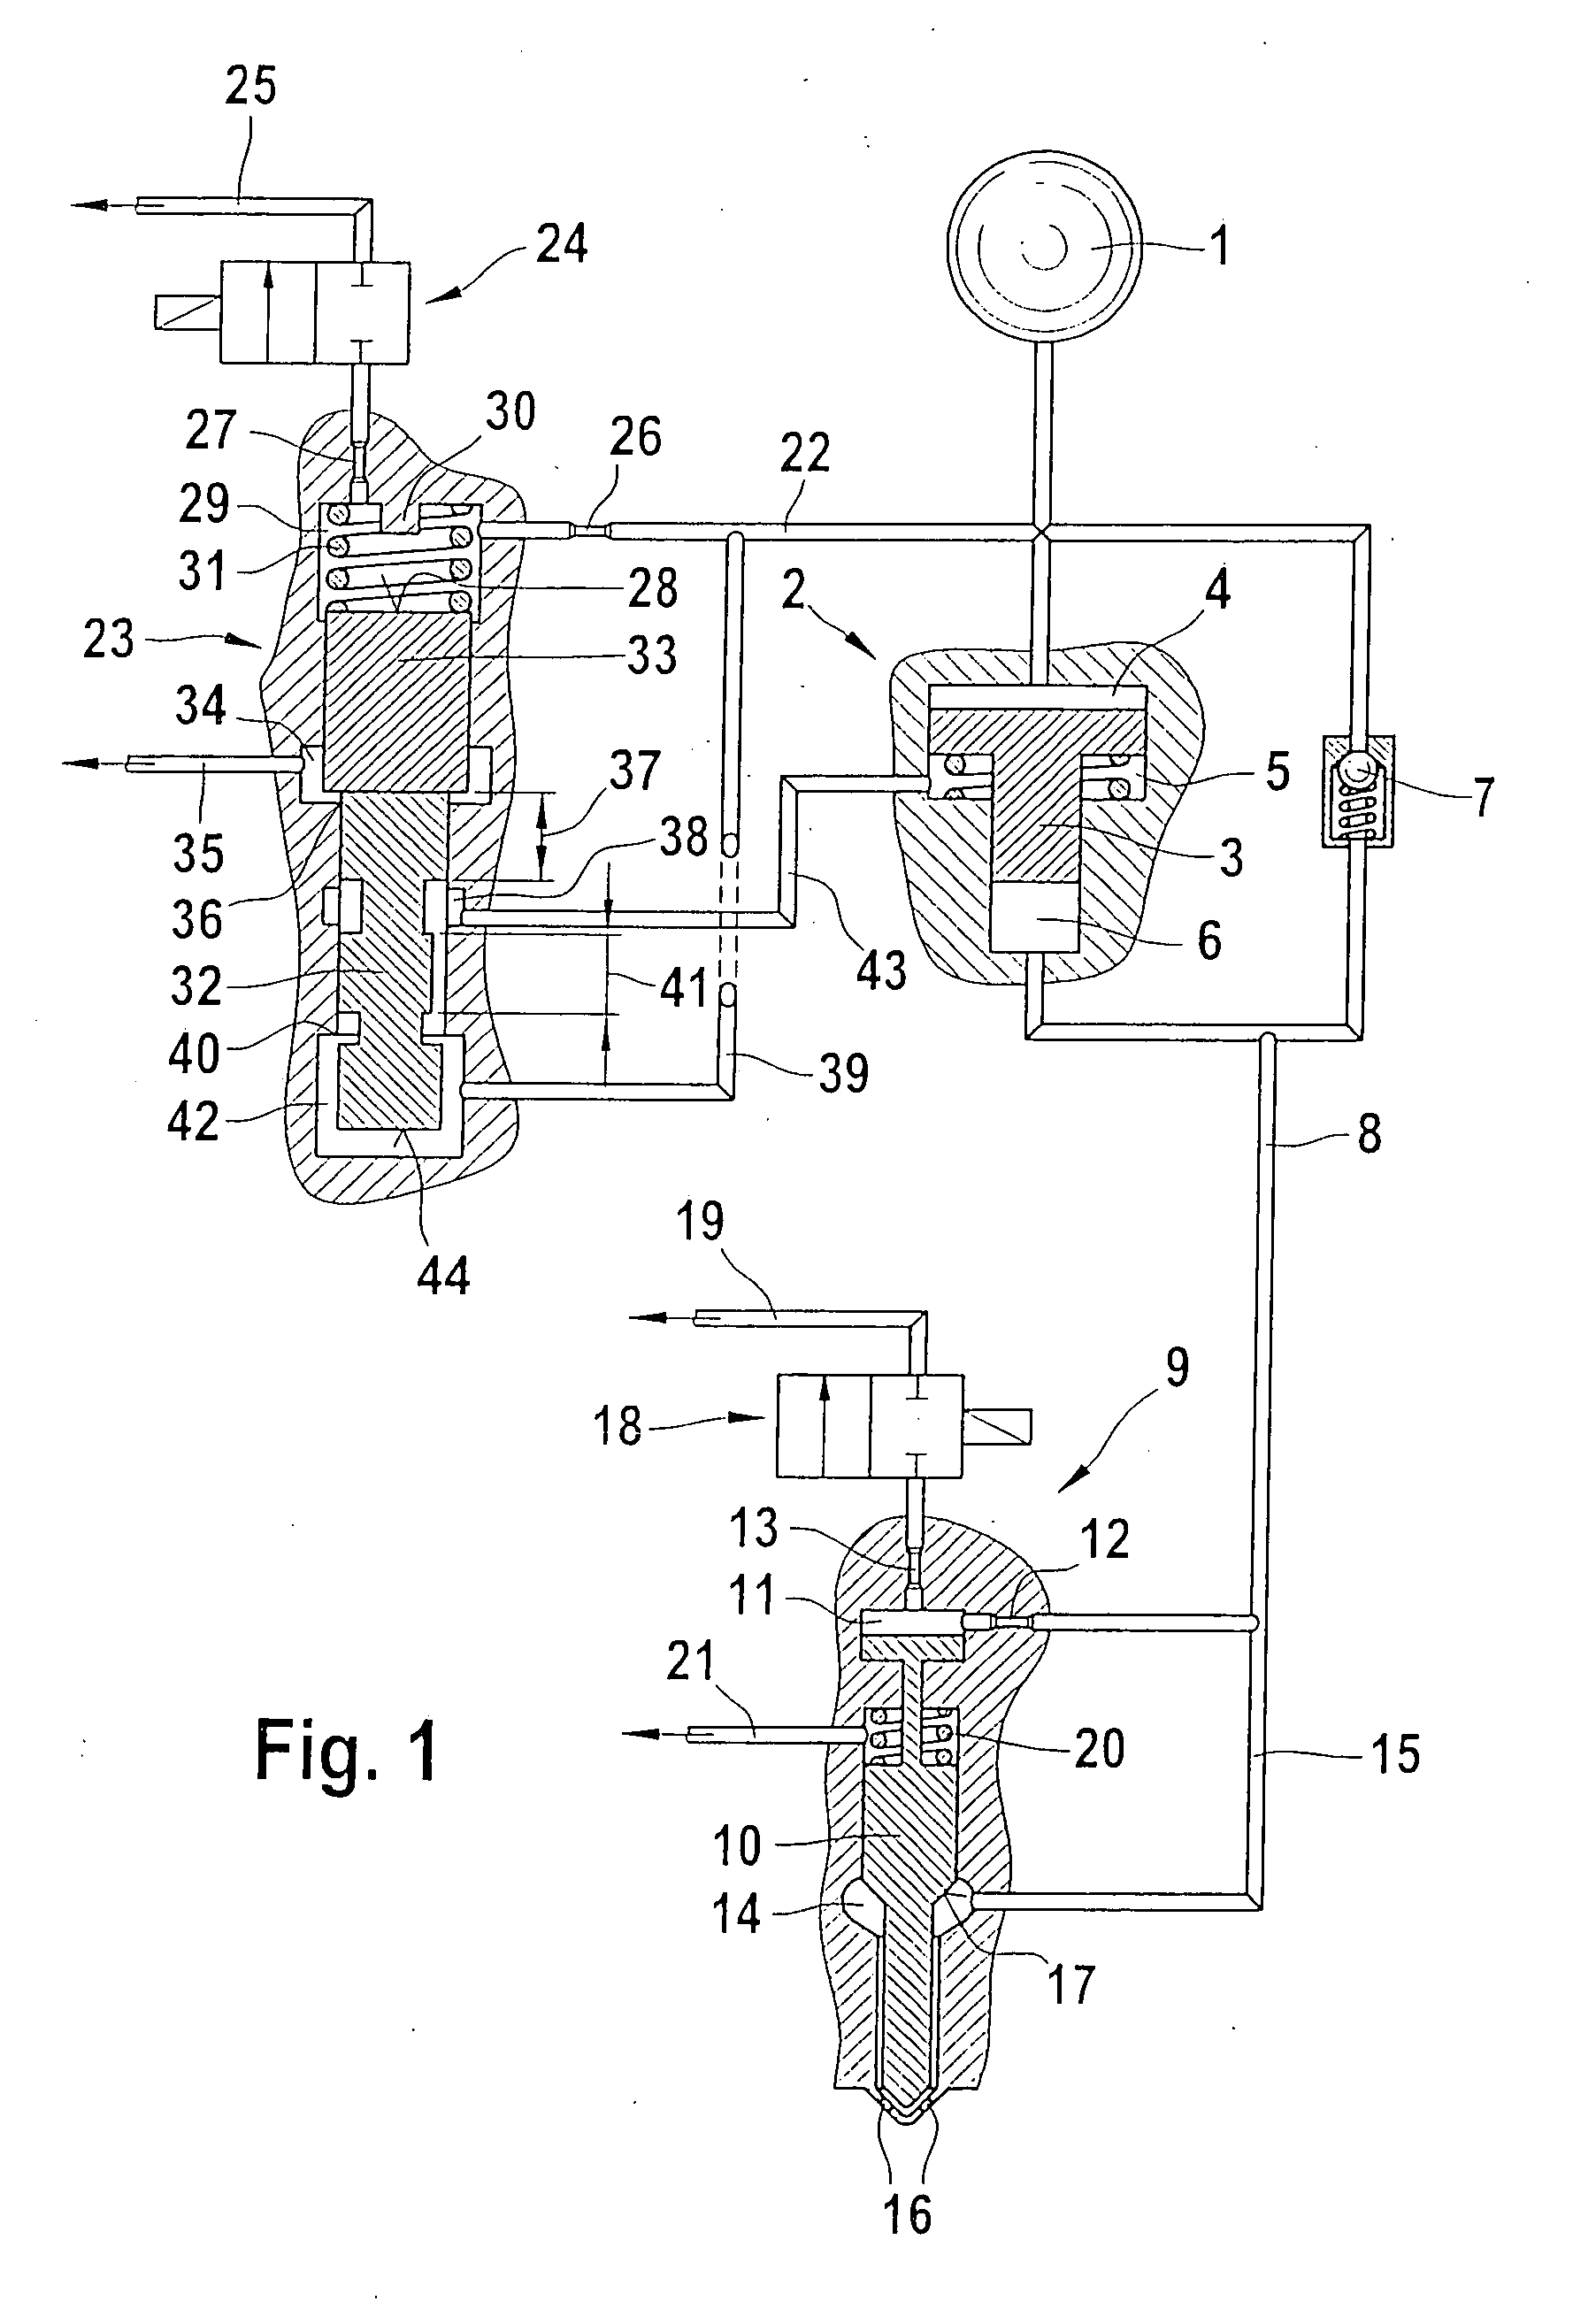 Control valve for a fuel injector that contains a pressure intensifier